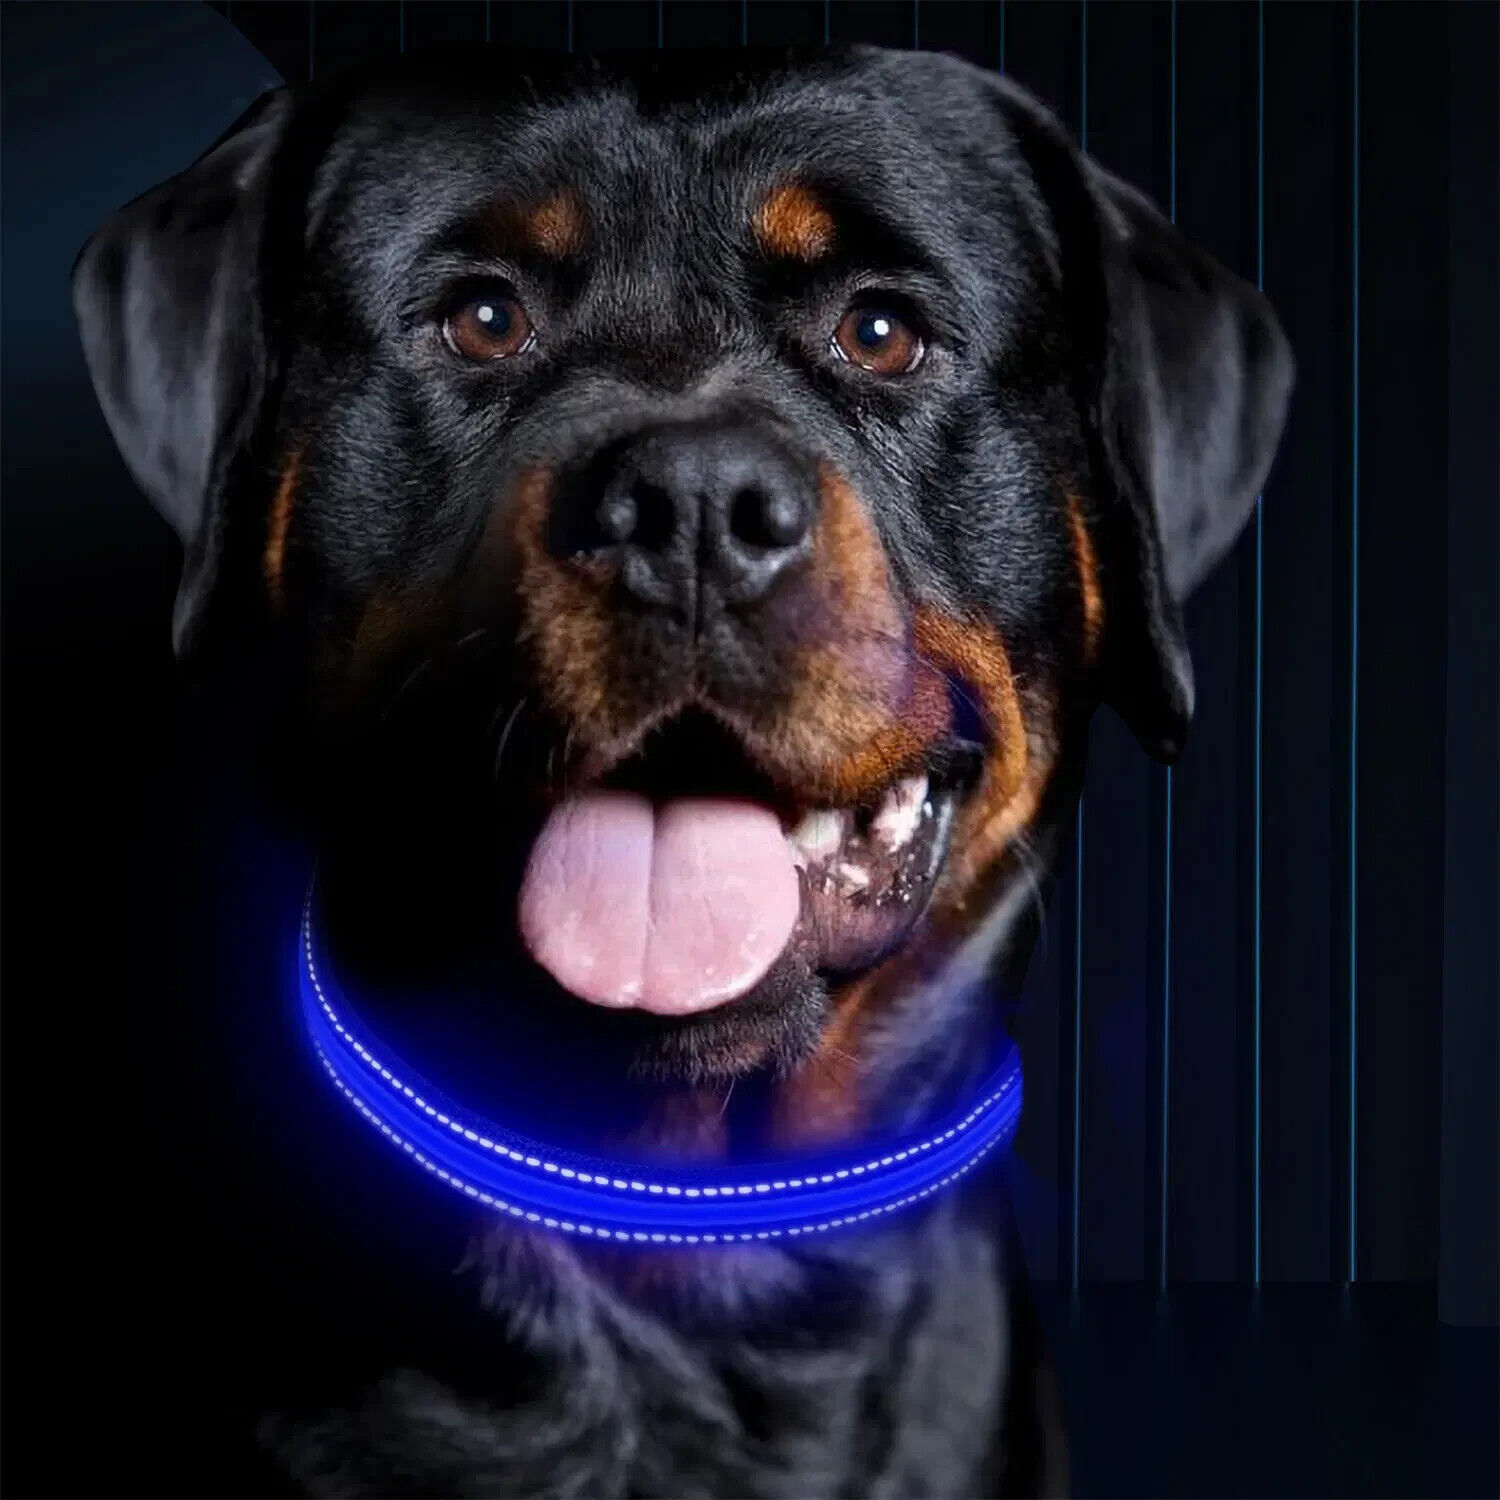 RECHARGEABLE LED PET GLOW COLLAR night safety adjustable flash light-up FOR dog